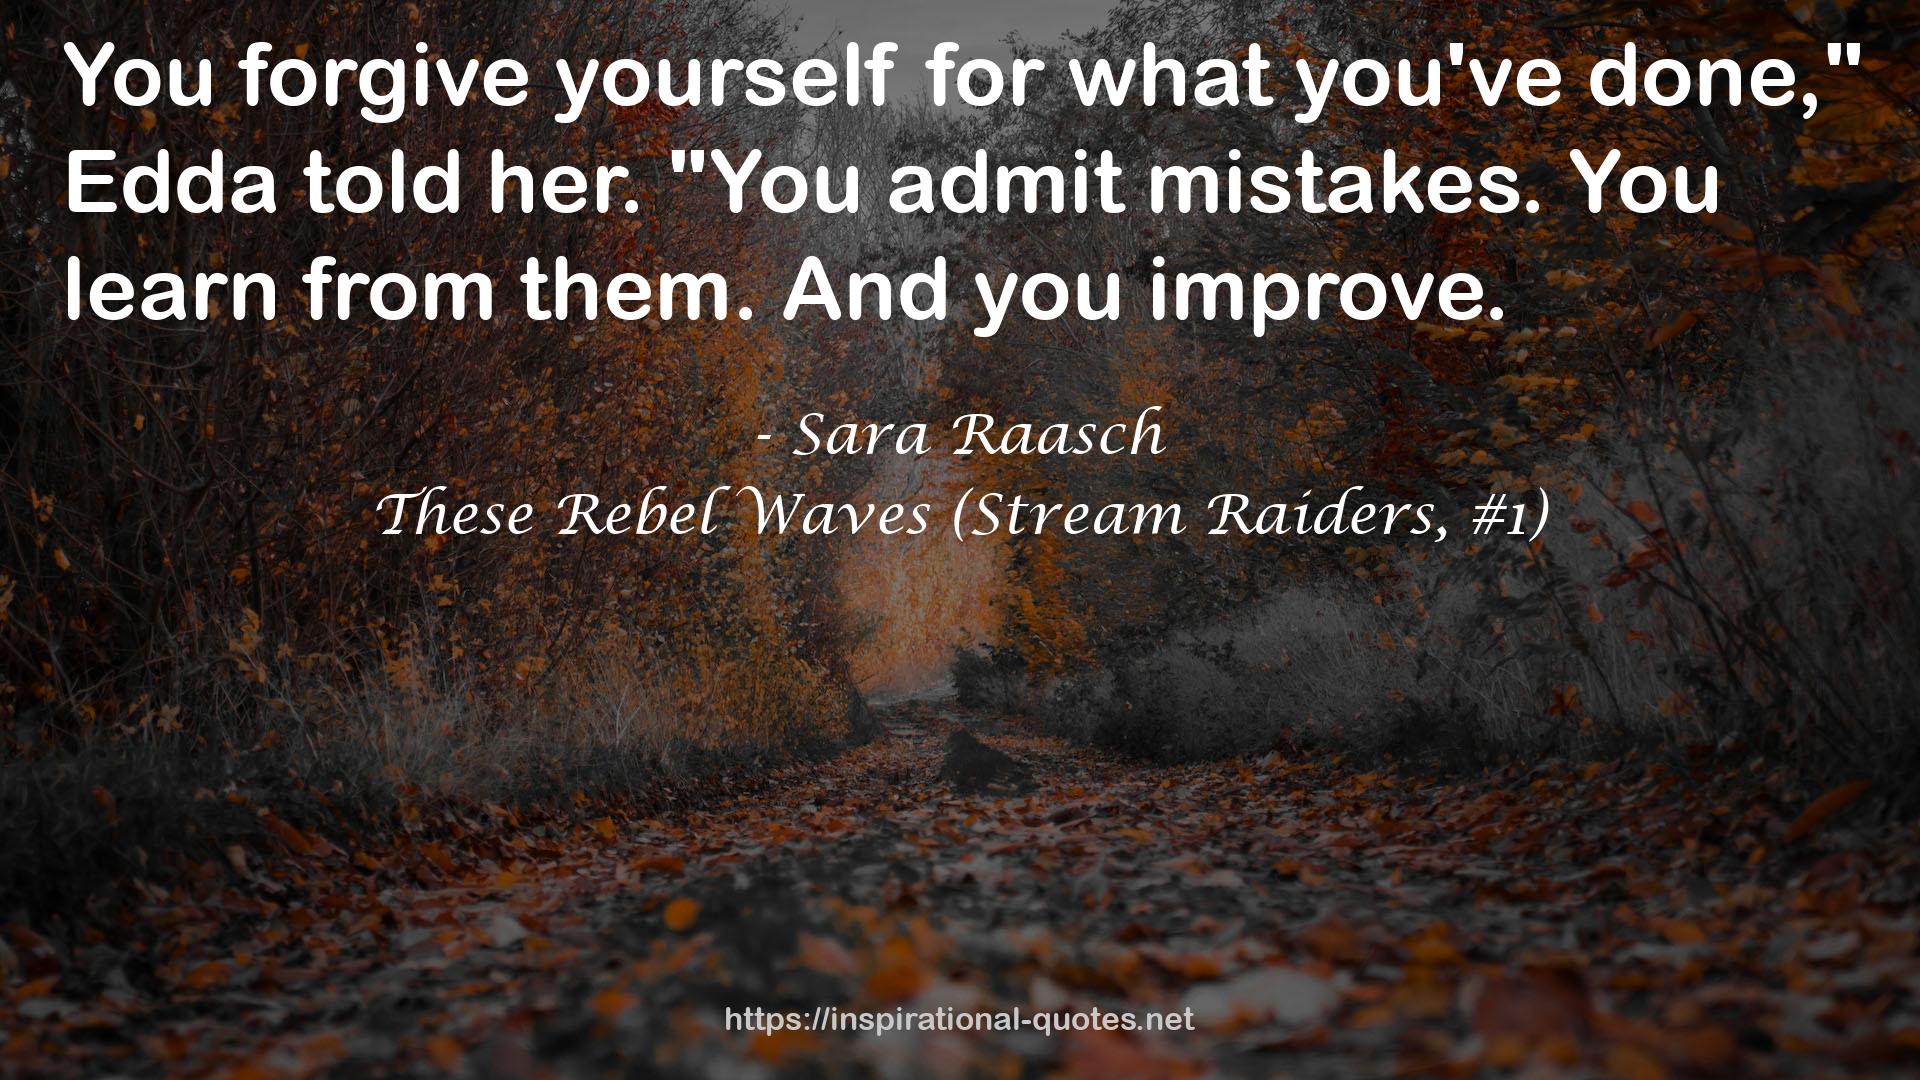 These Rebel Waves (Stream Raiders, #1) QUOTES